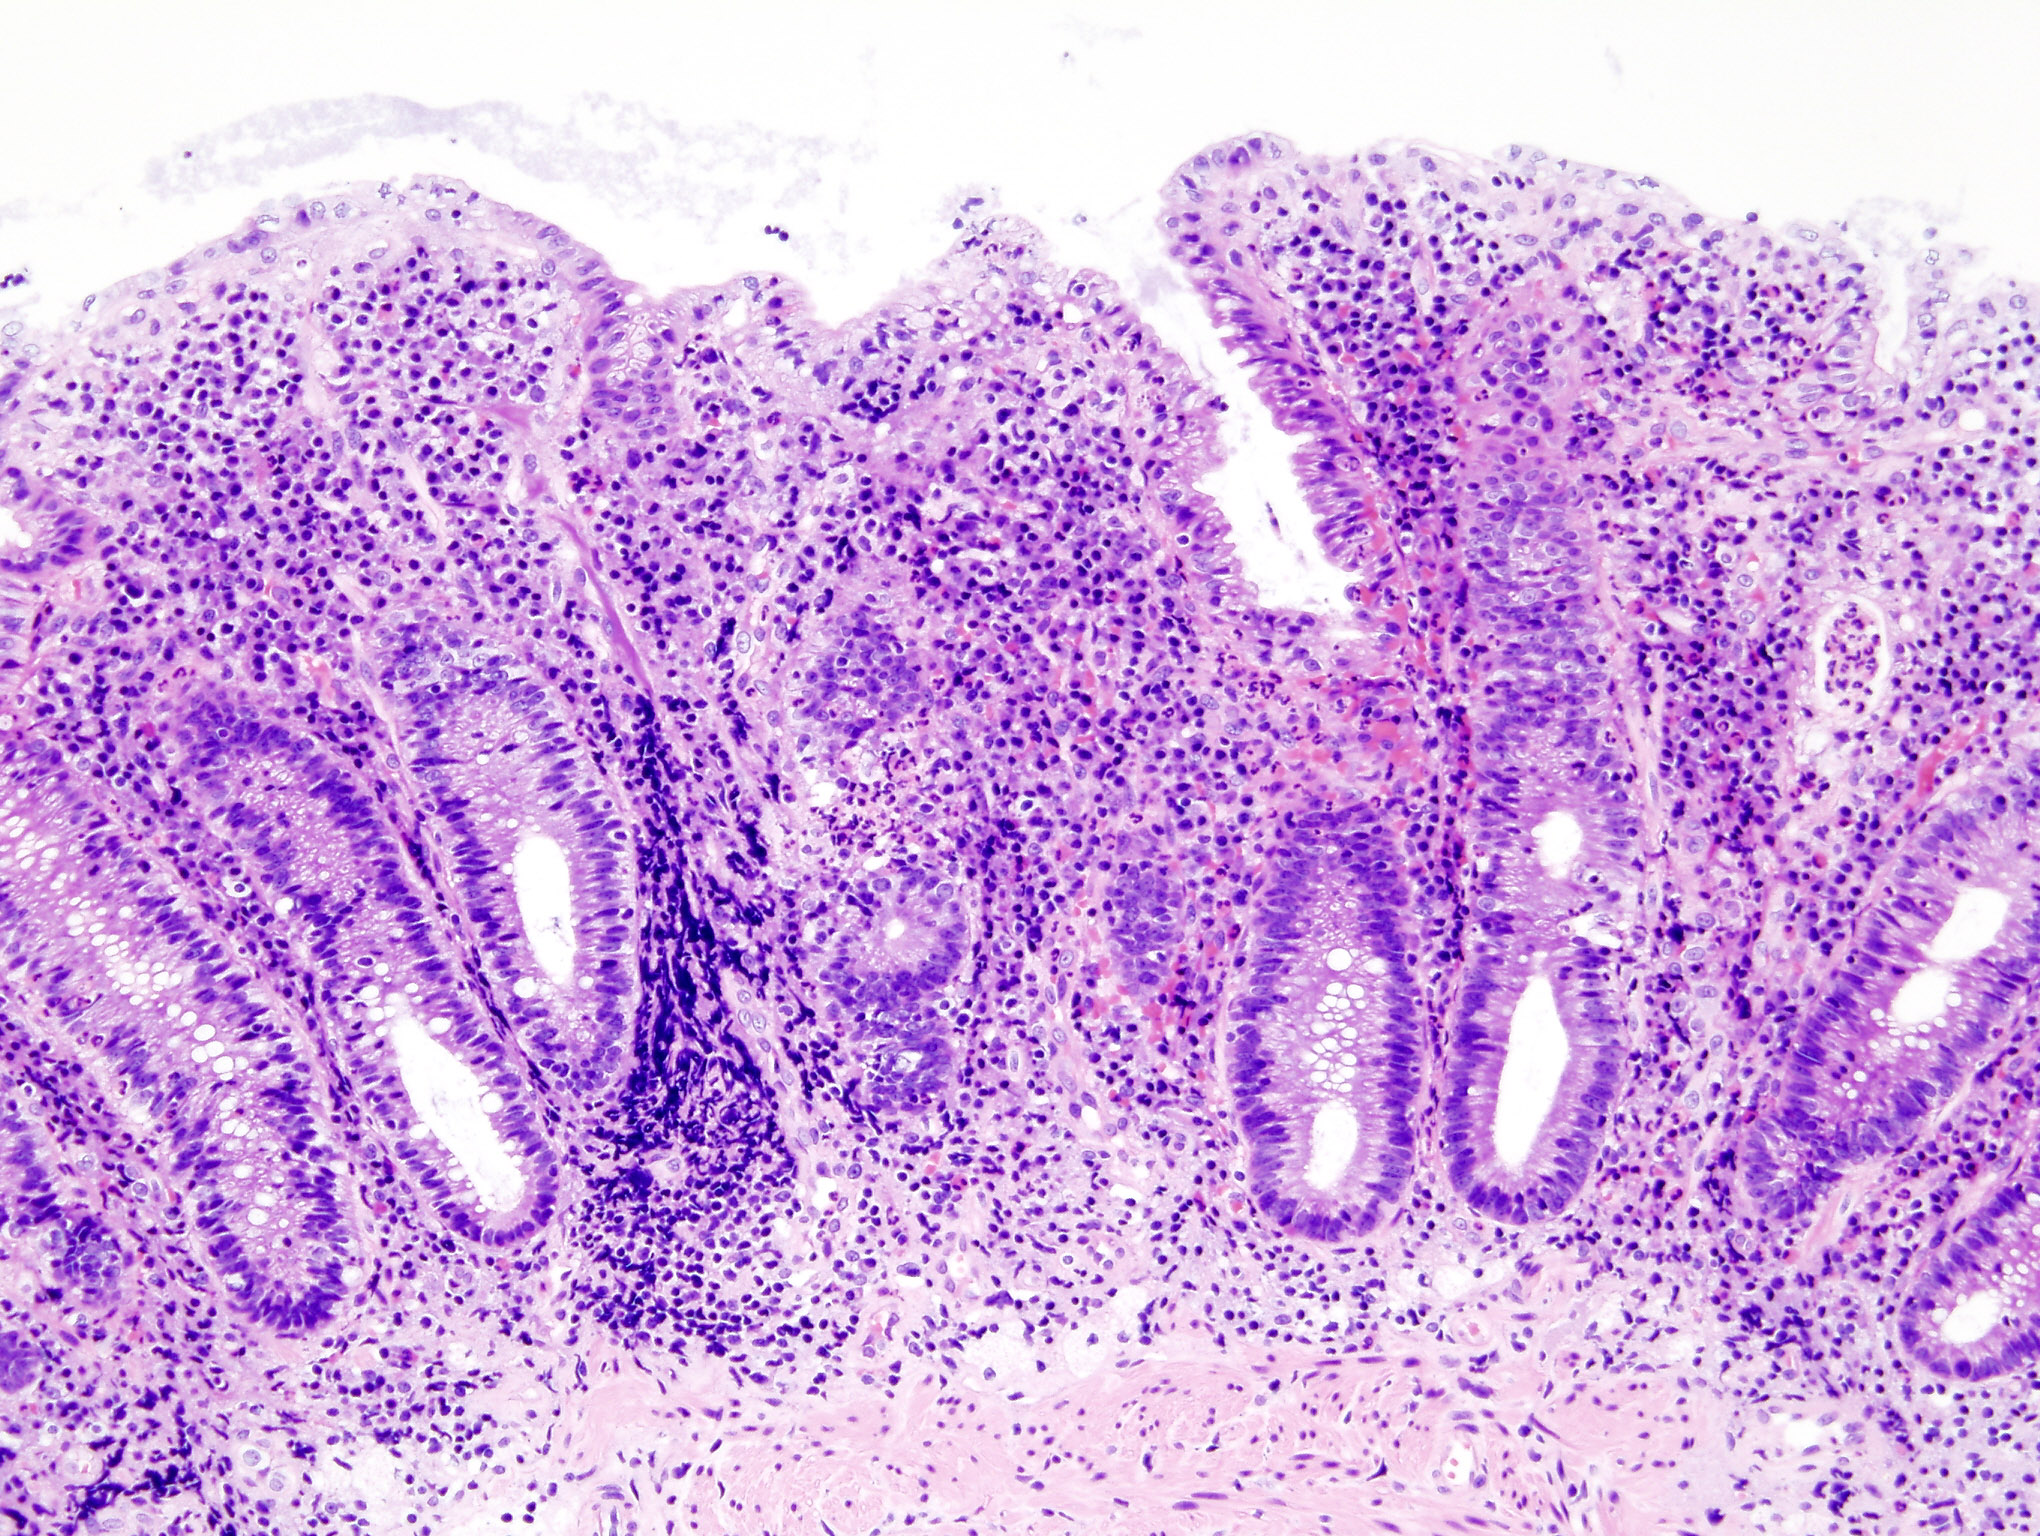 Ulcerative colitis. H&E stain showing marked lymphocytic infiltration (blue/purple) of the intestinal mucosa and distortion of the architecture of the crypts. [45]